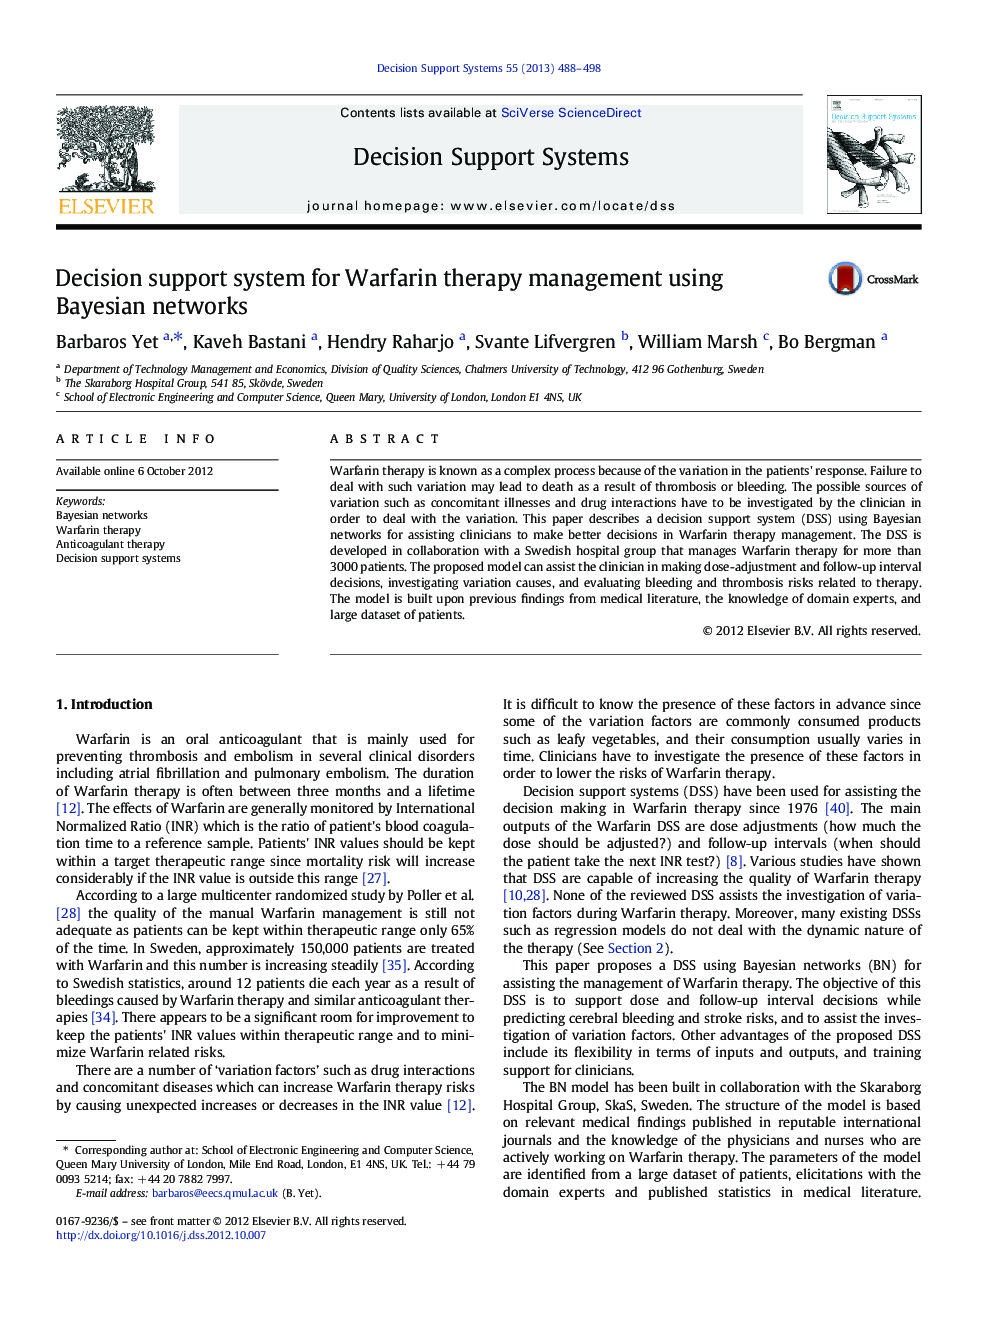 Decision support system for Warfarin therapy management using Bayesian networks